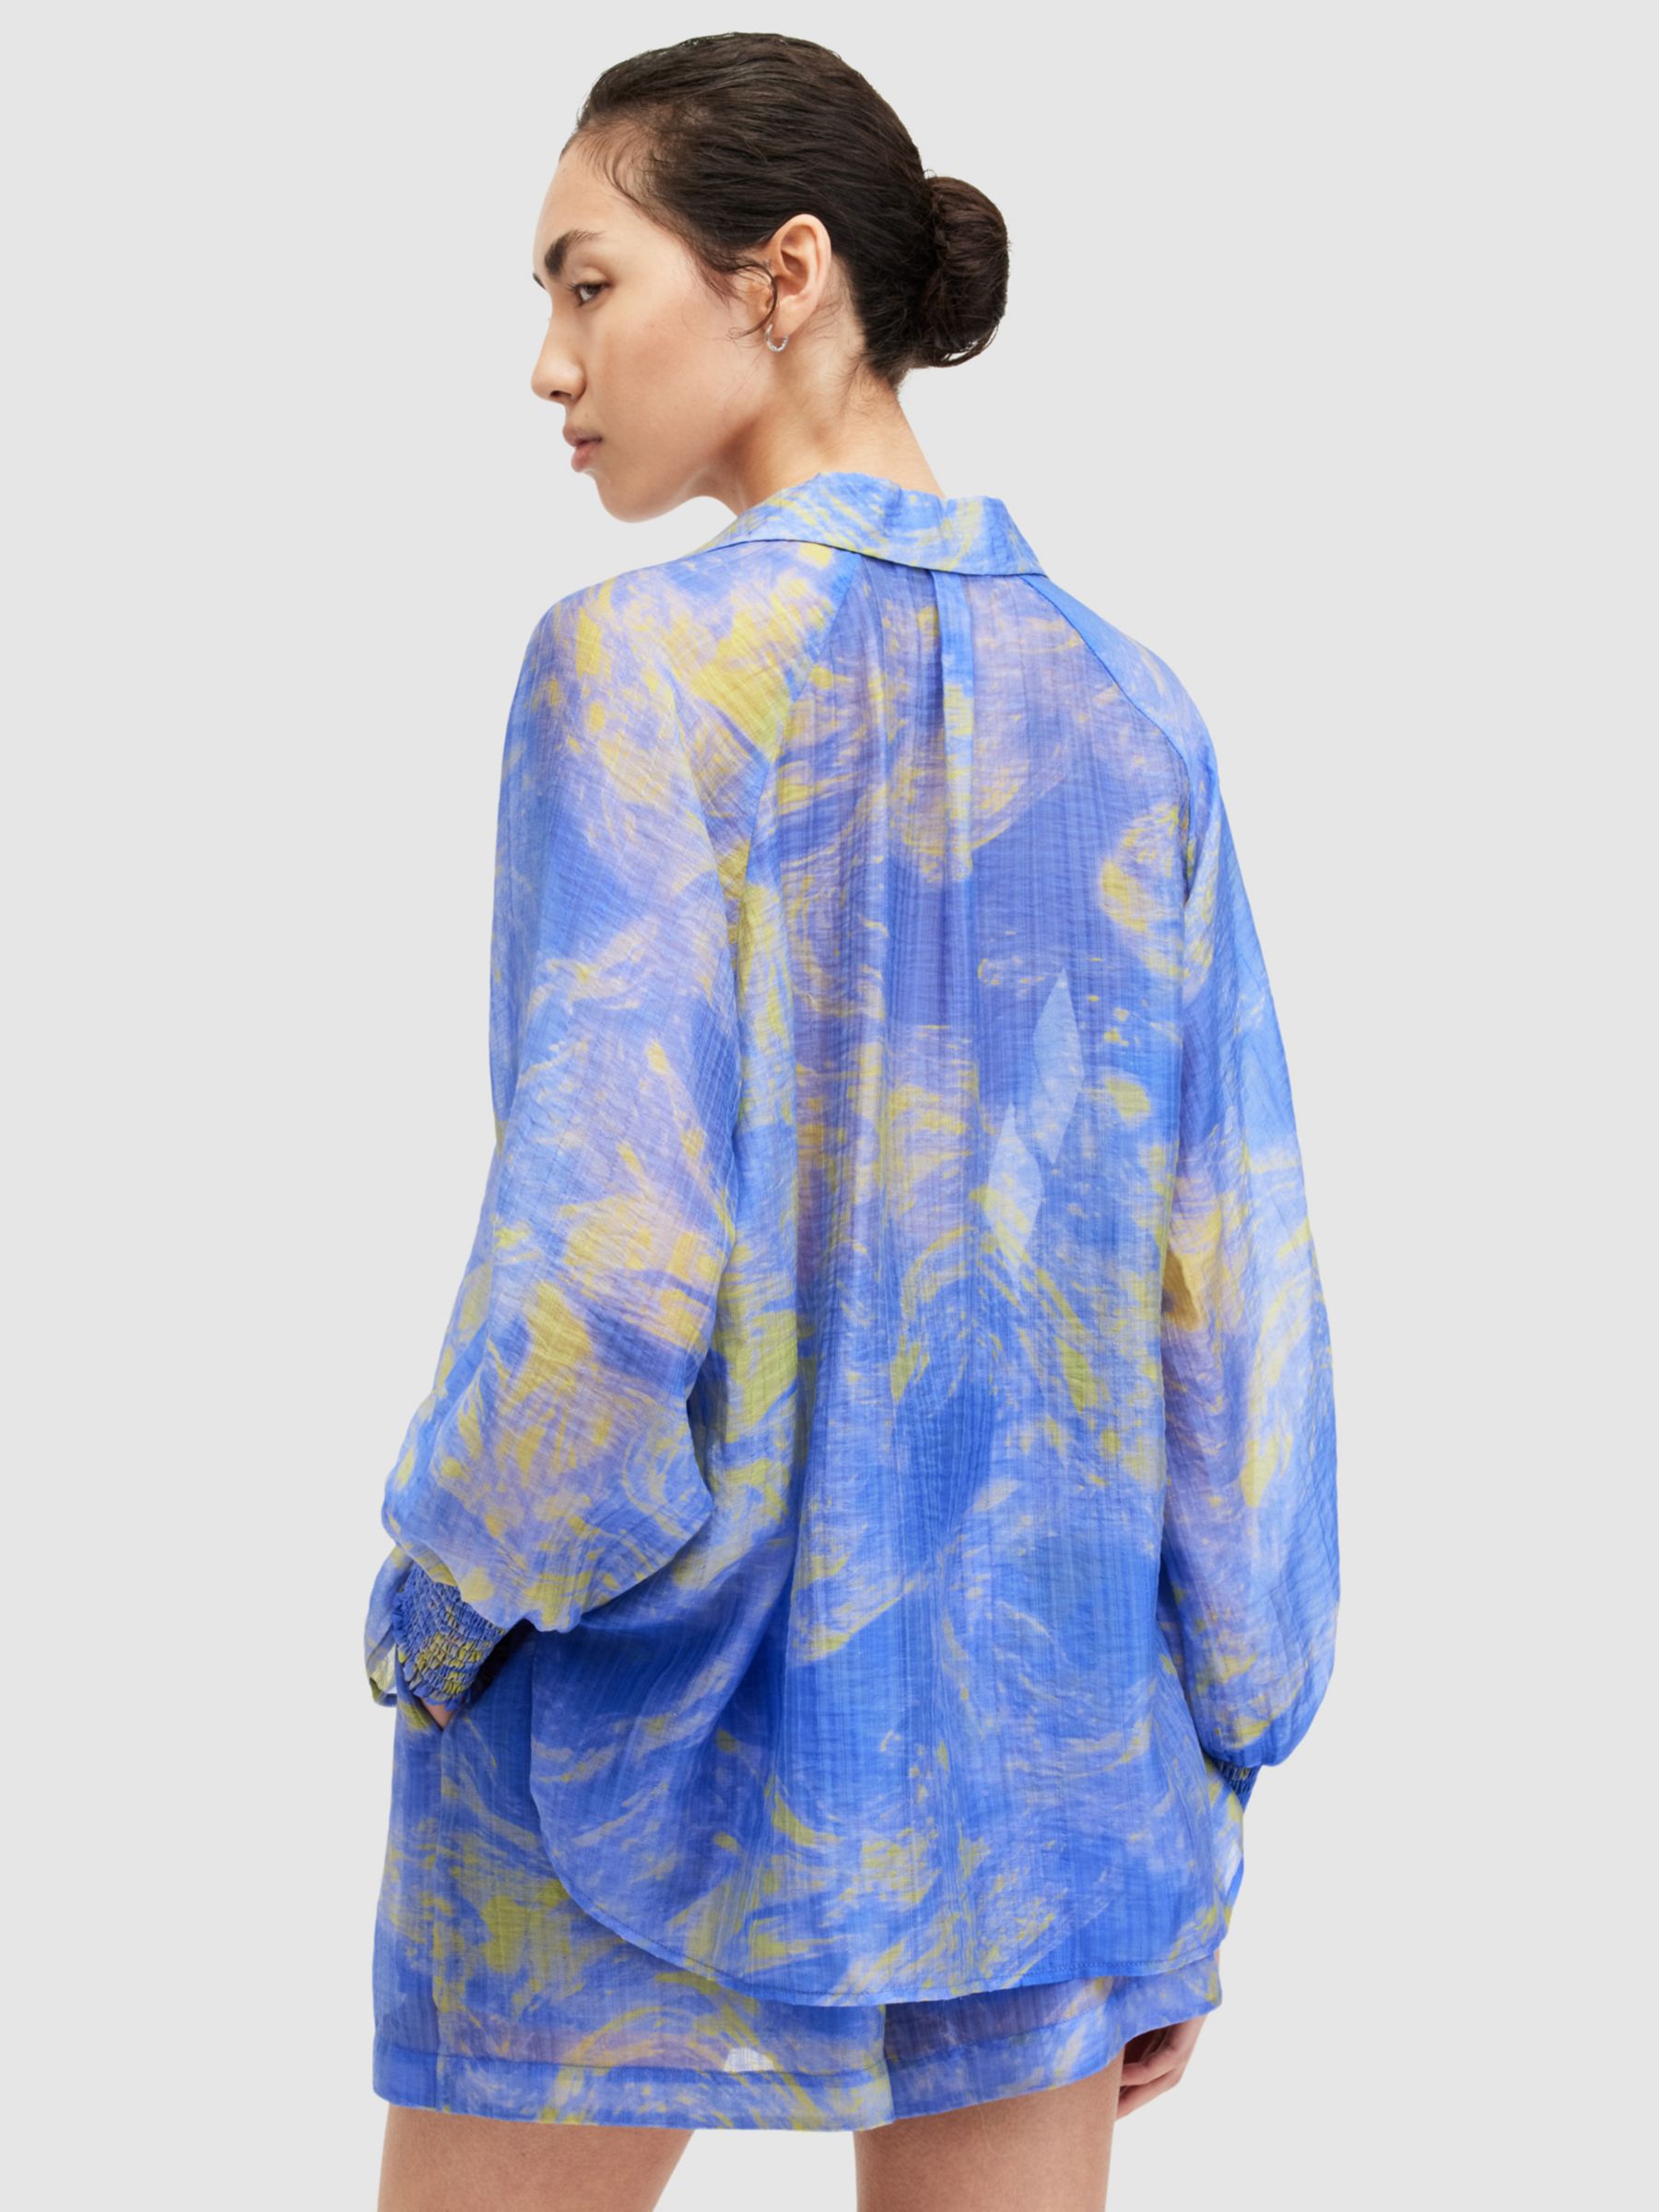 Buy AllSaints Isla Inspiral Abstract Print Shirt, Electric Blue/Yellow Online at johnlewis.com